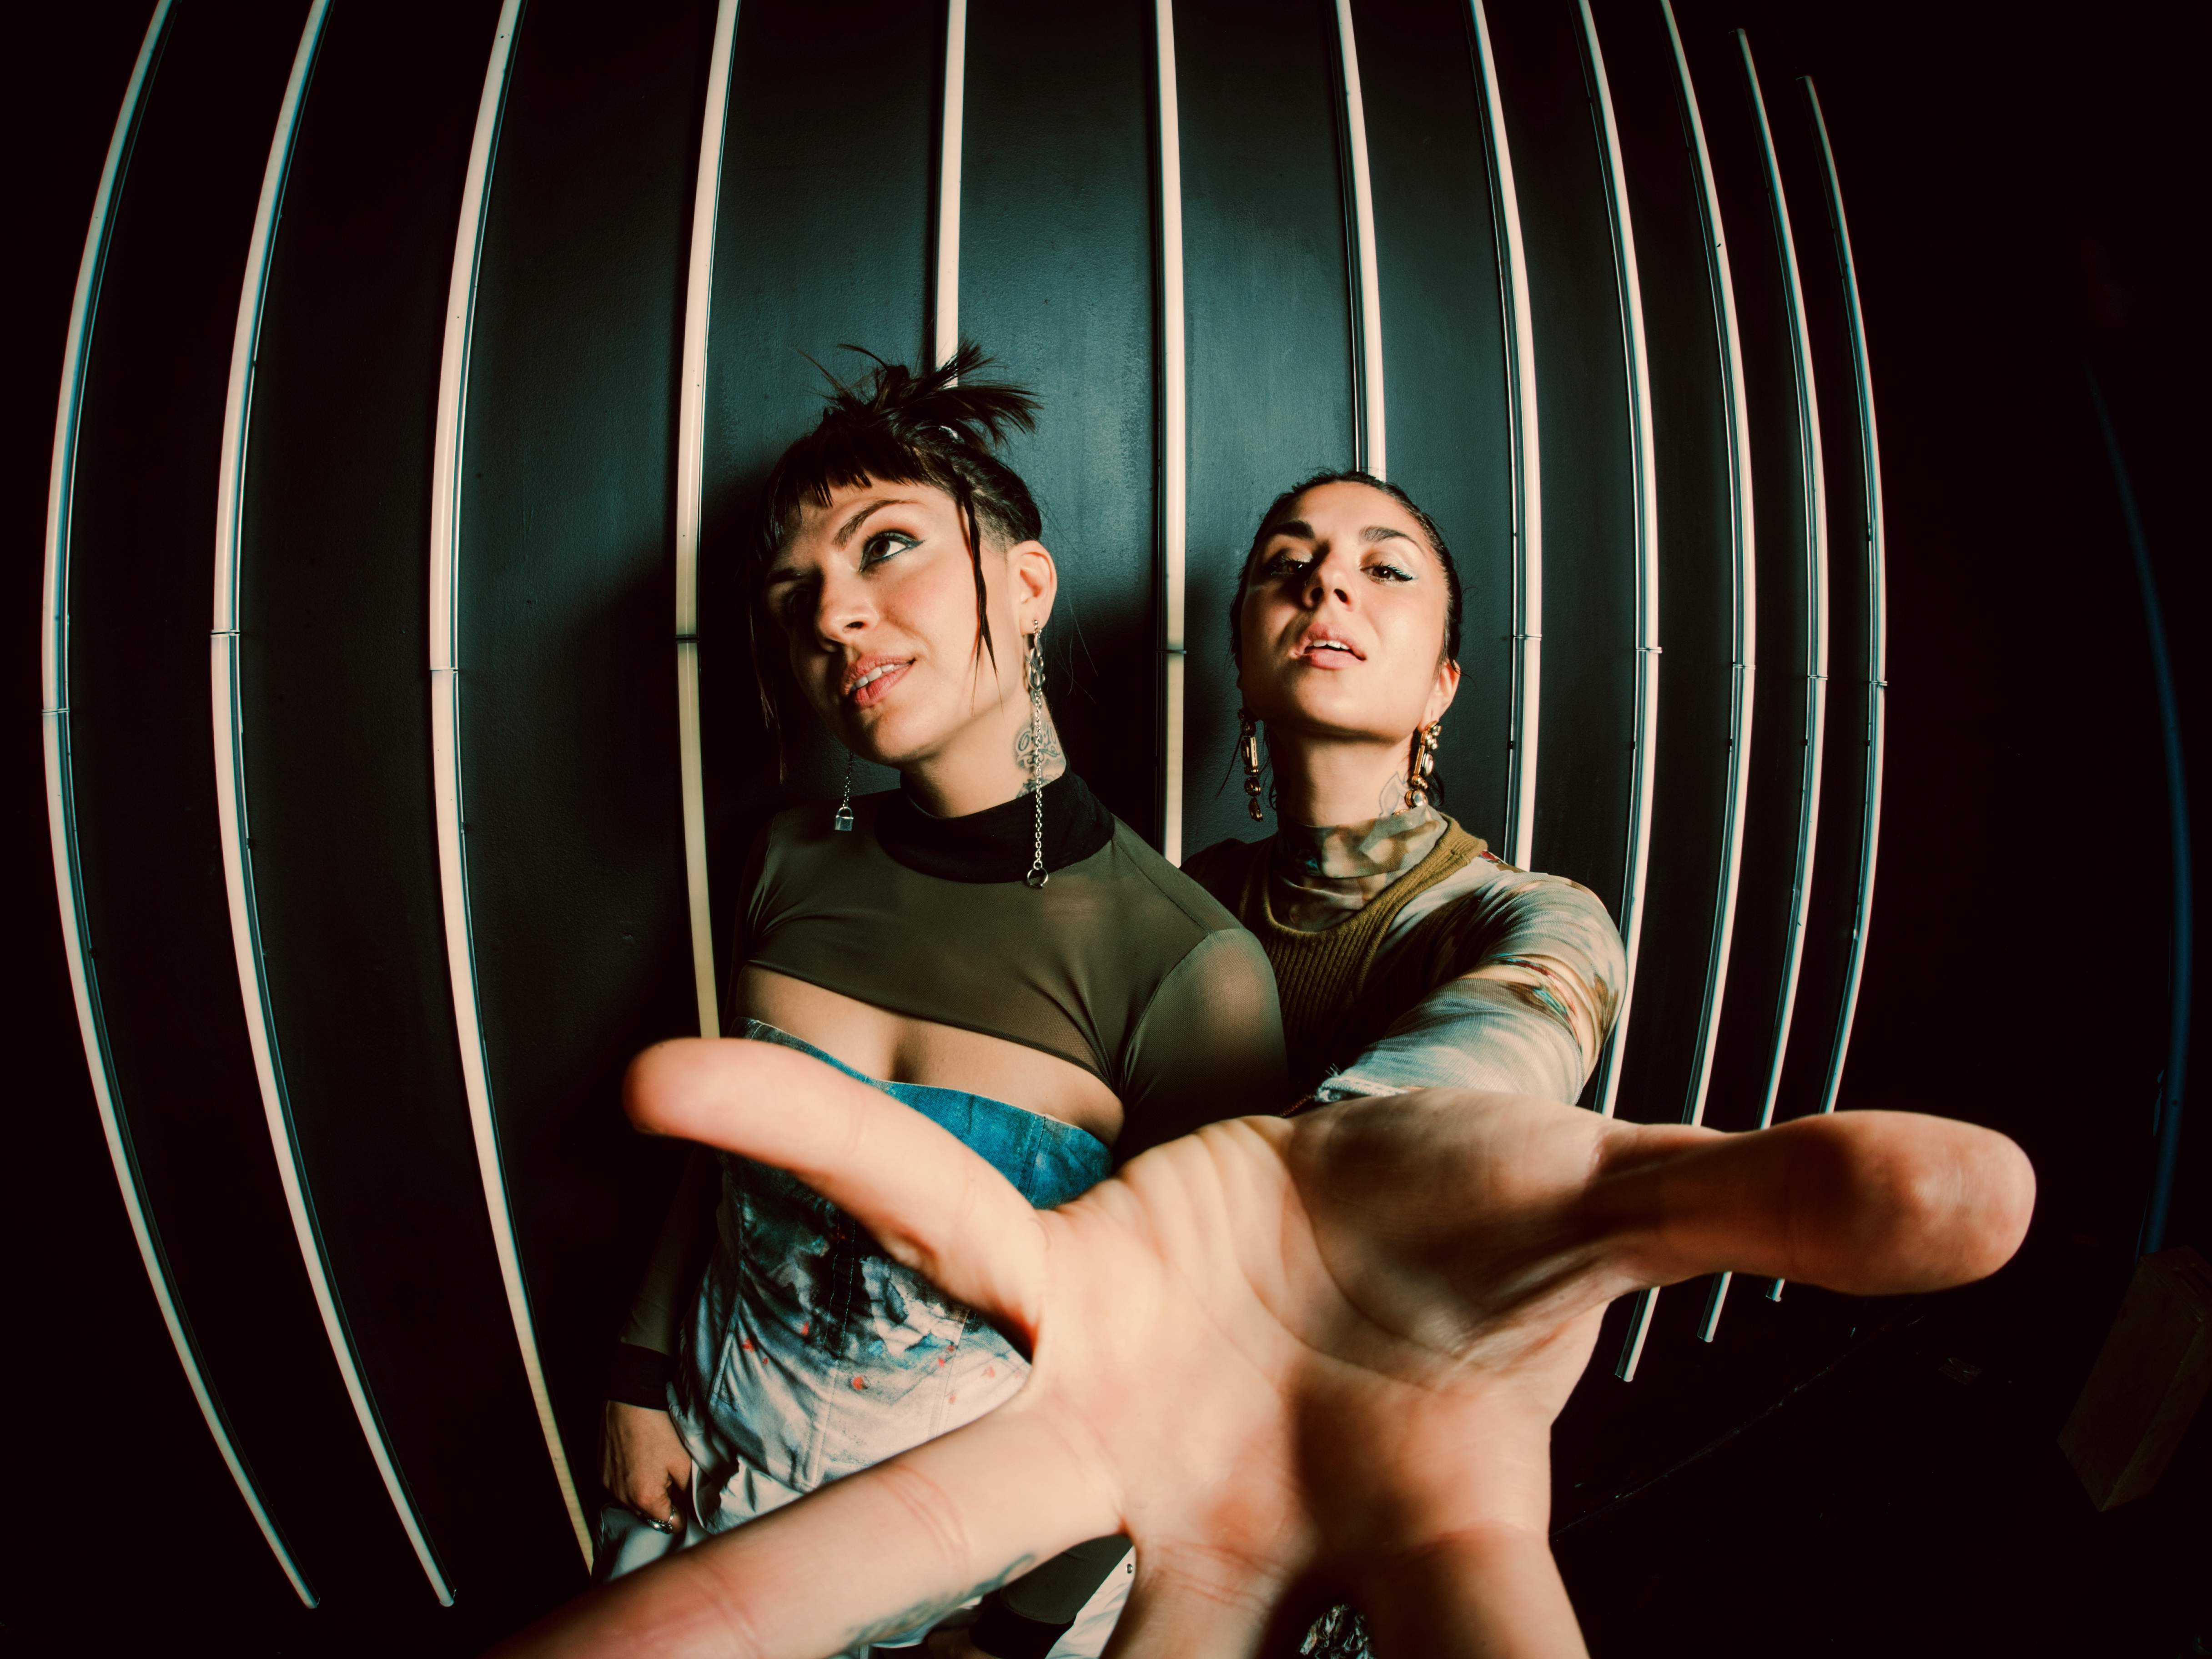 krewella get wet we are one